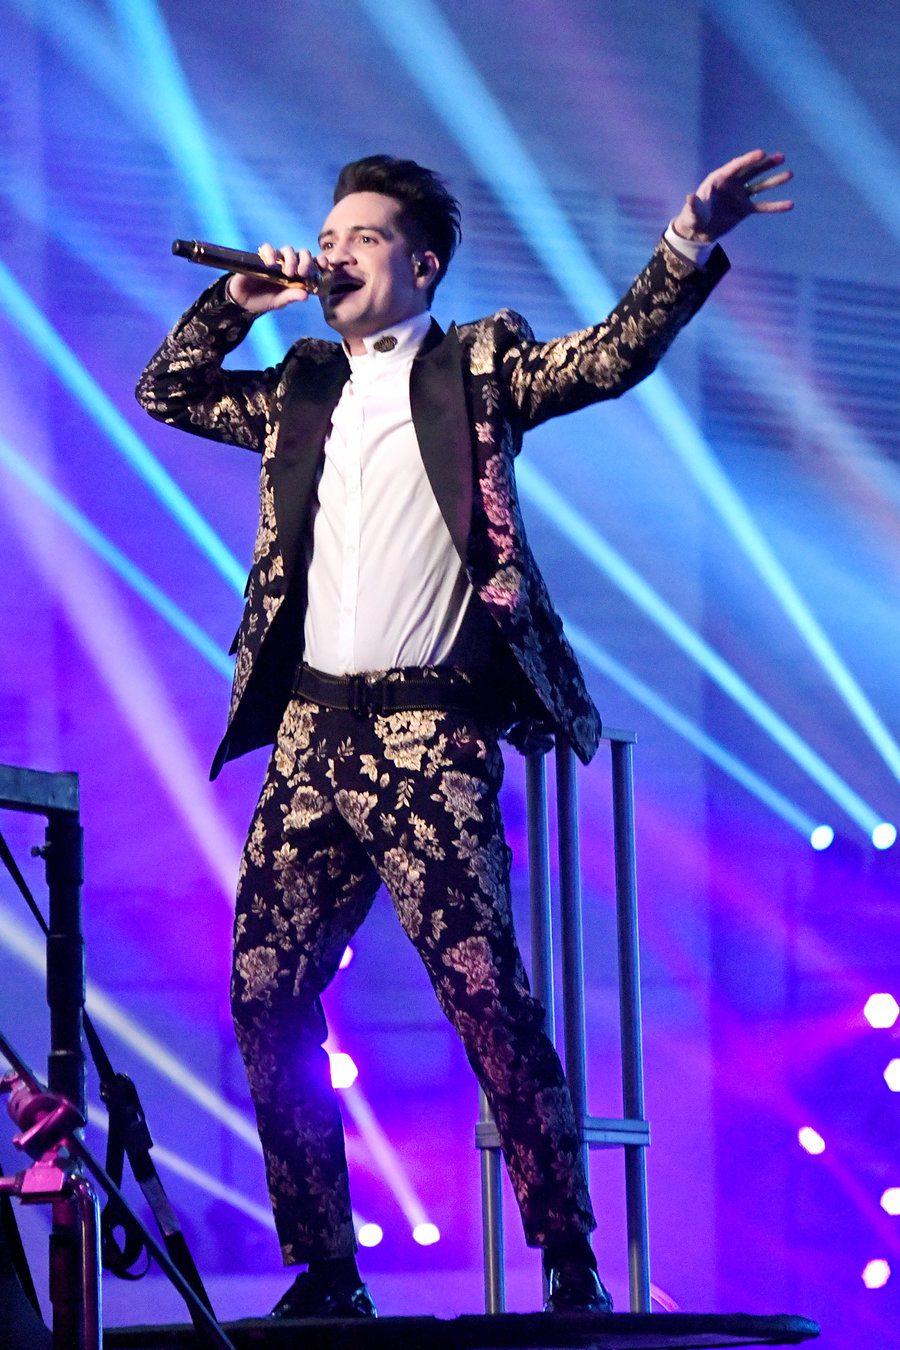 Panic! At The Disco Frontman: Brendon Urie